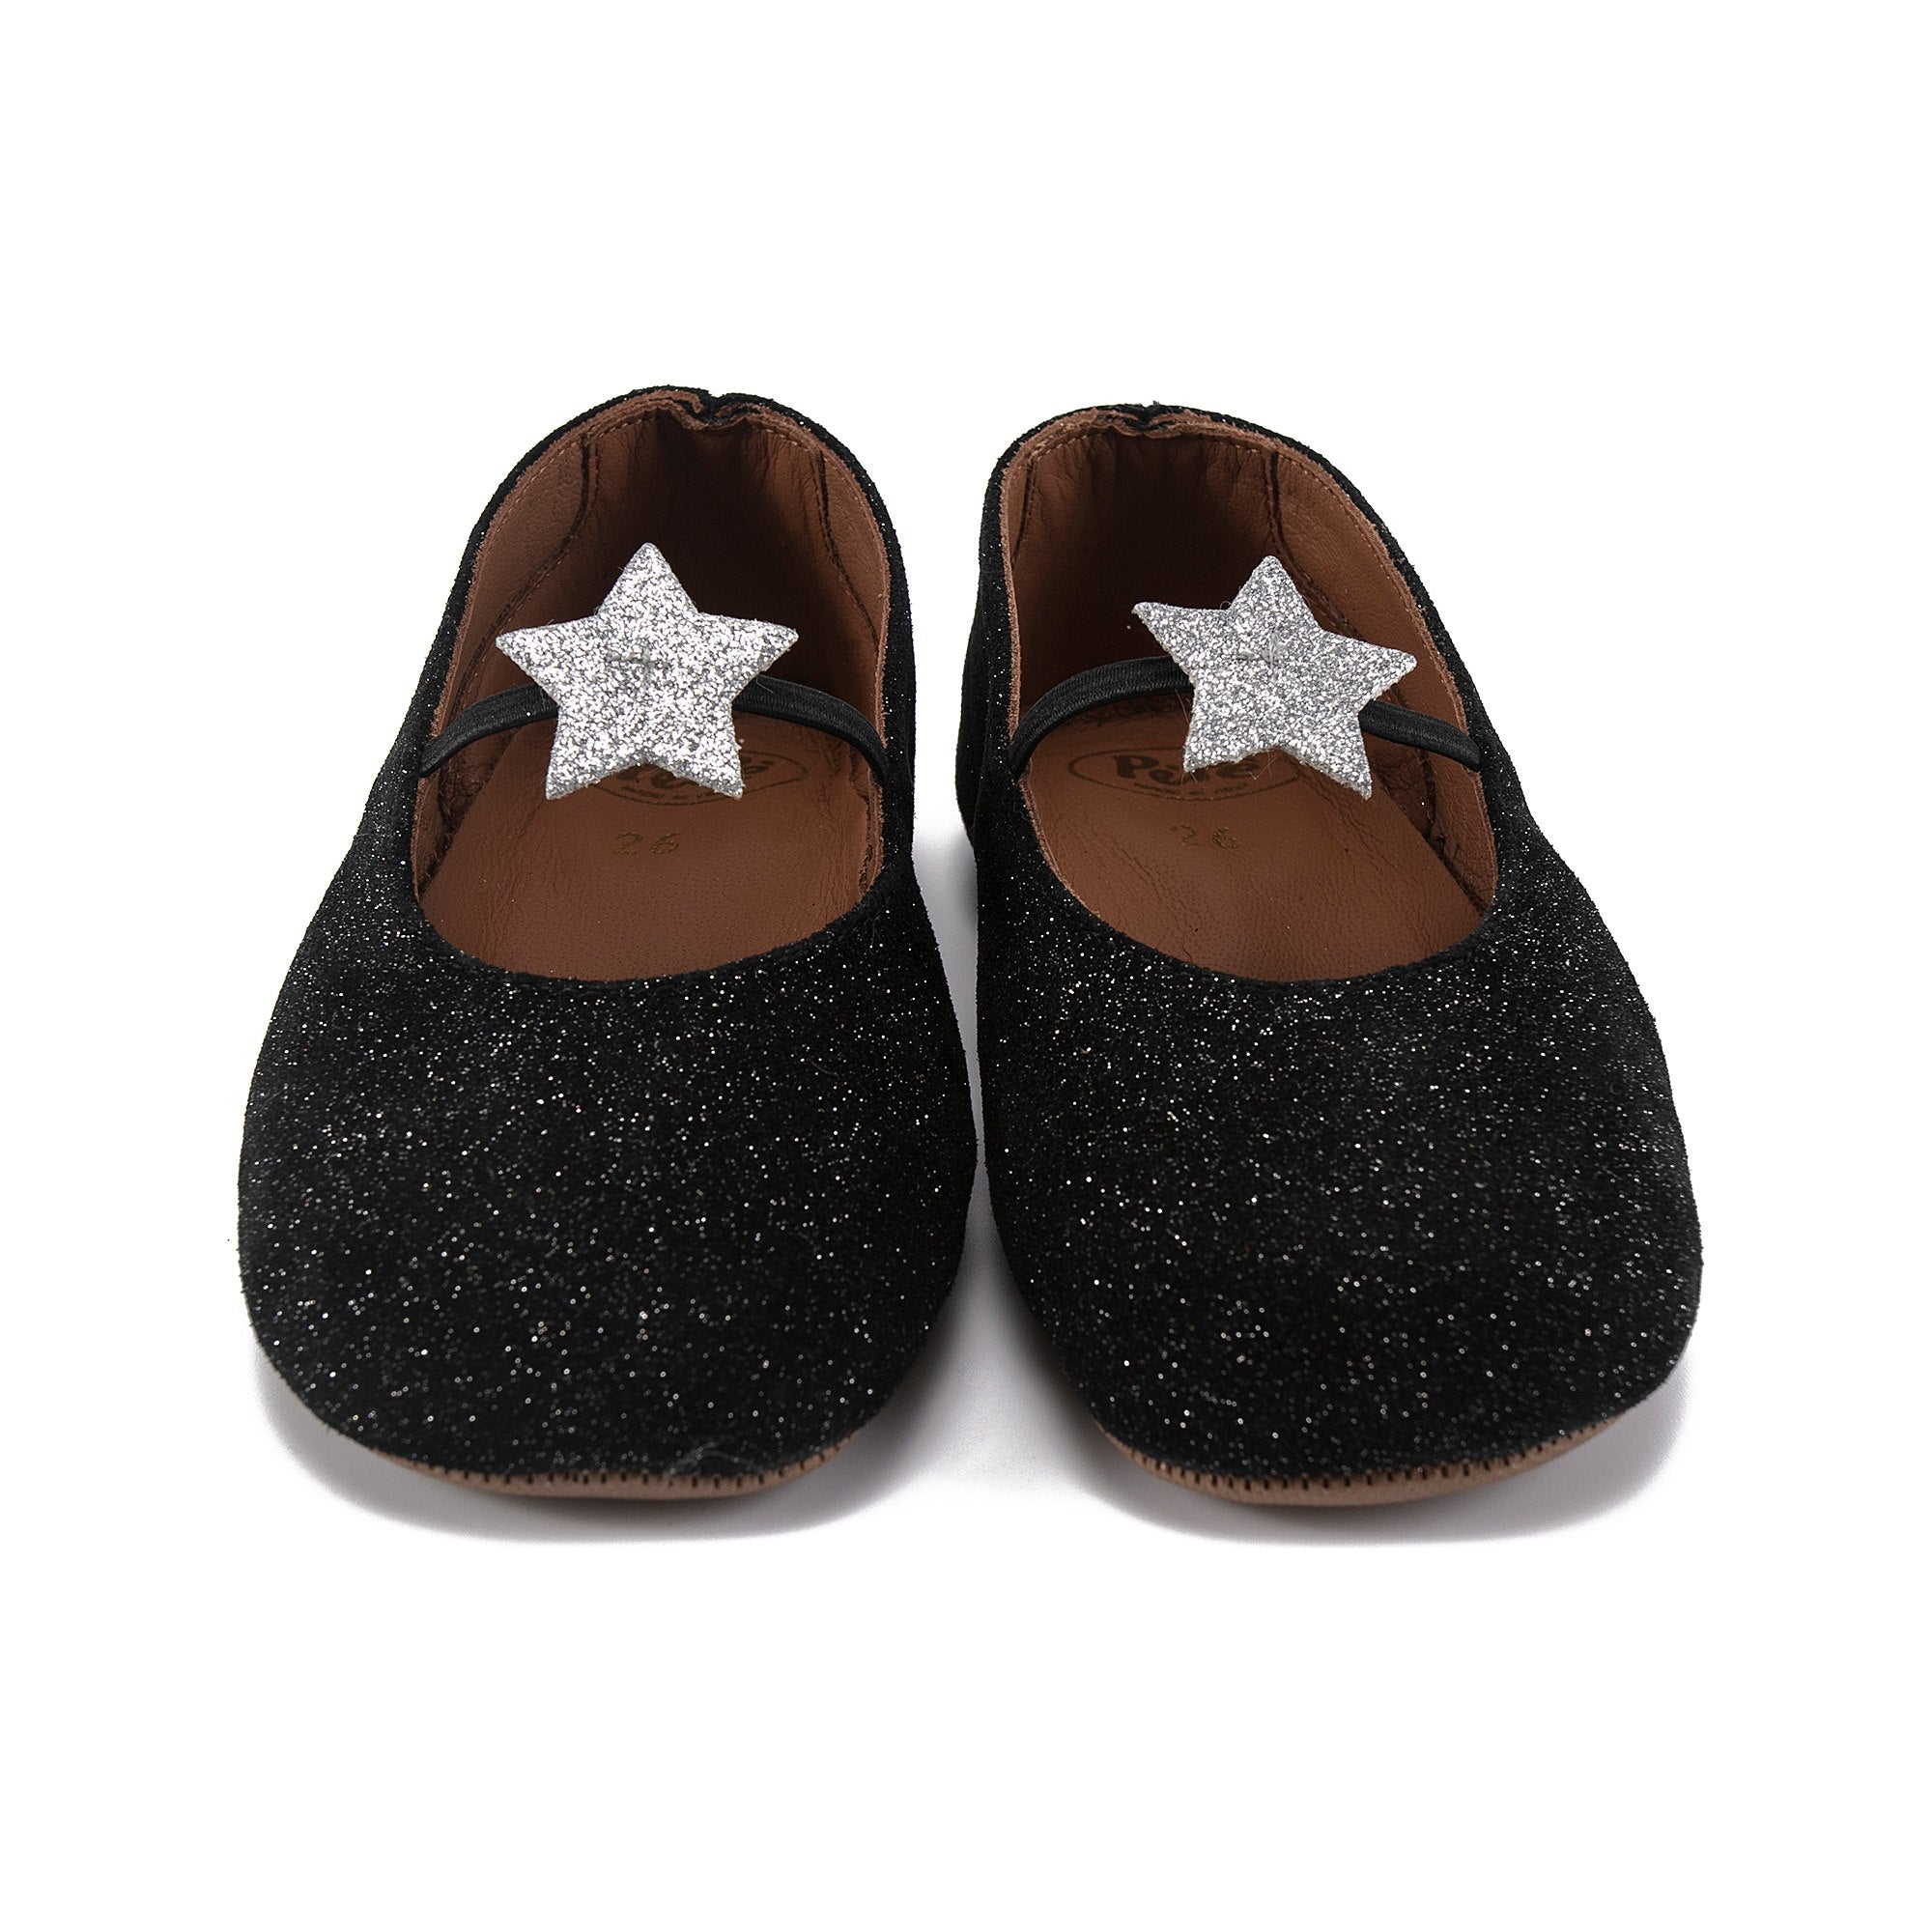 Girls Black Star Leather Shoes